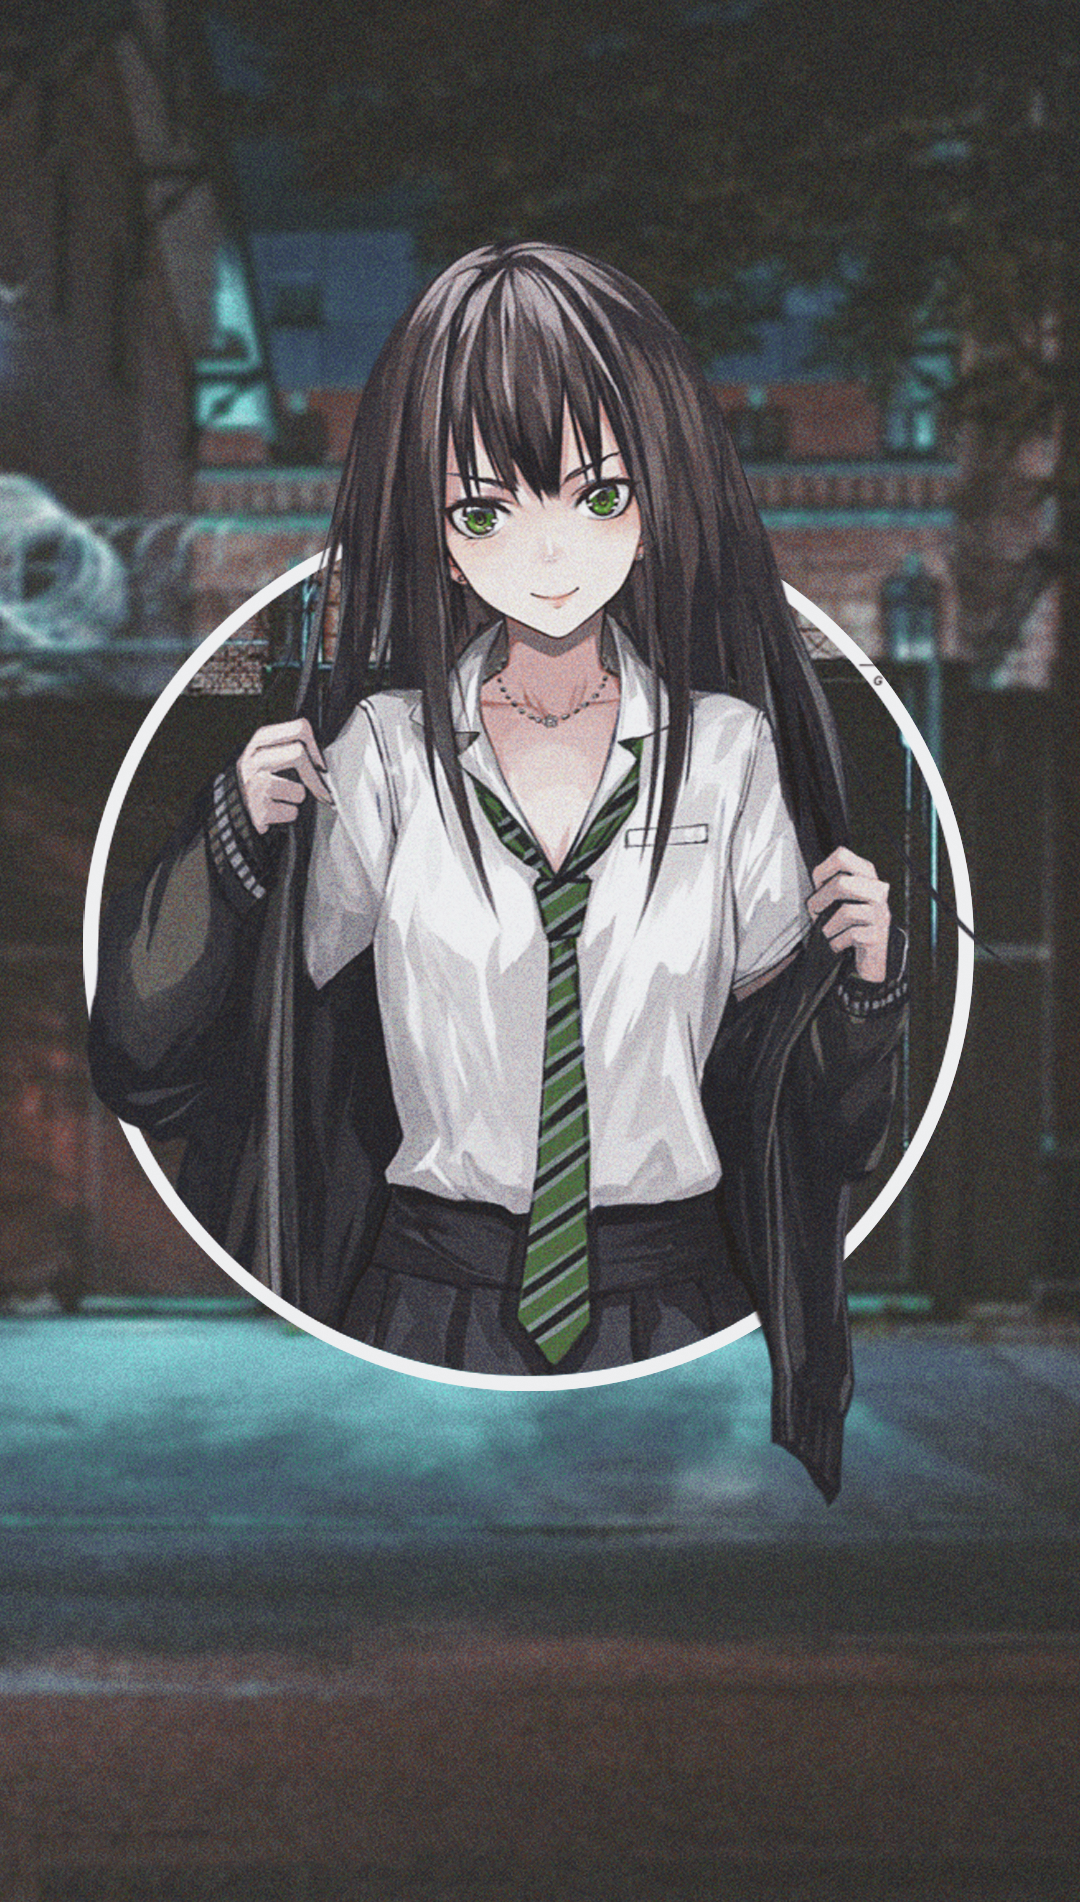 Anime 1080x1902 anime anime girls picture-in-picture Shibuya Rin